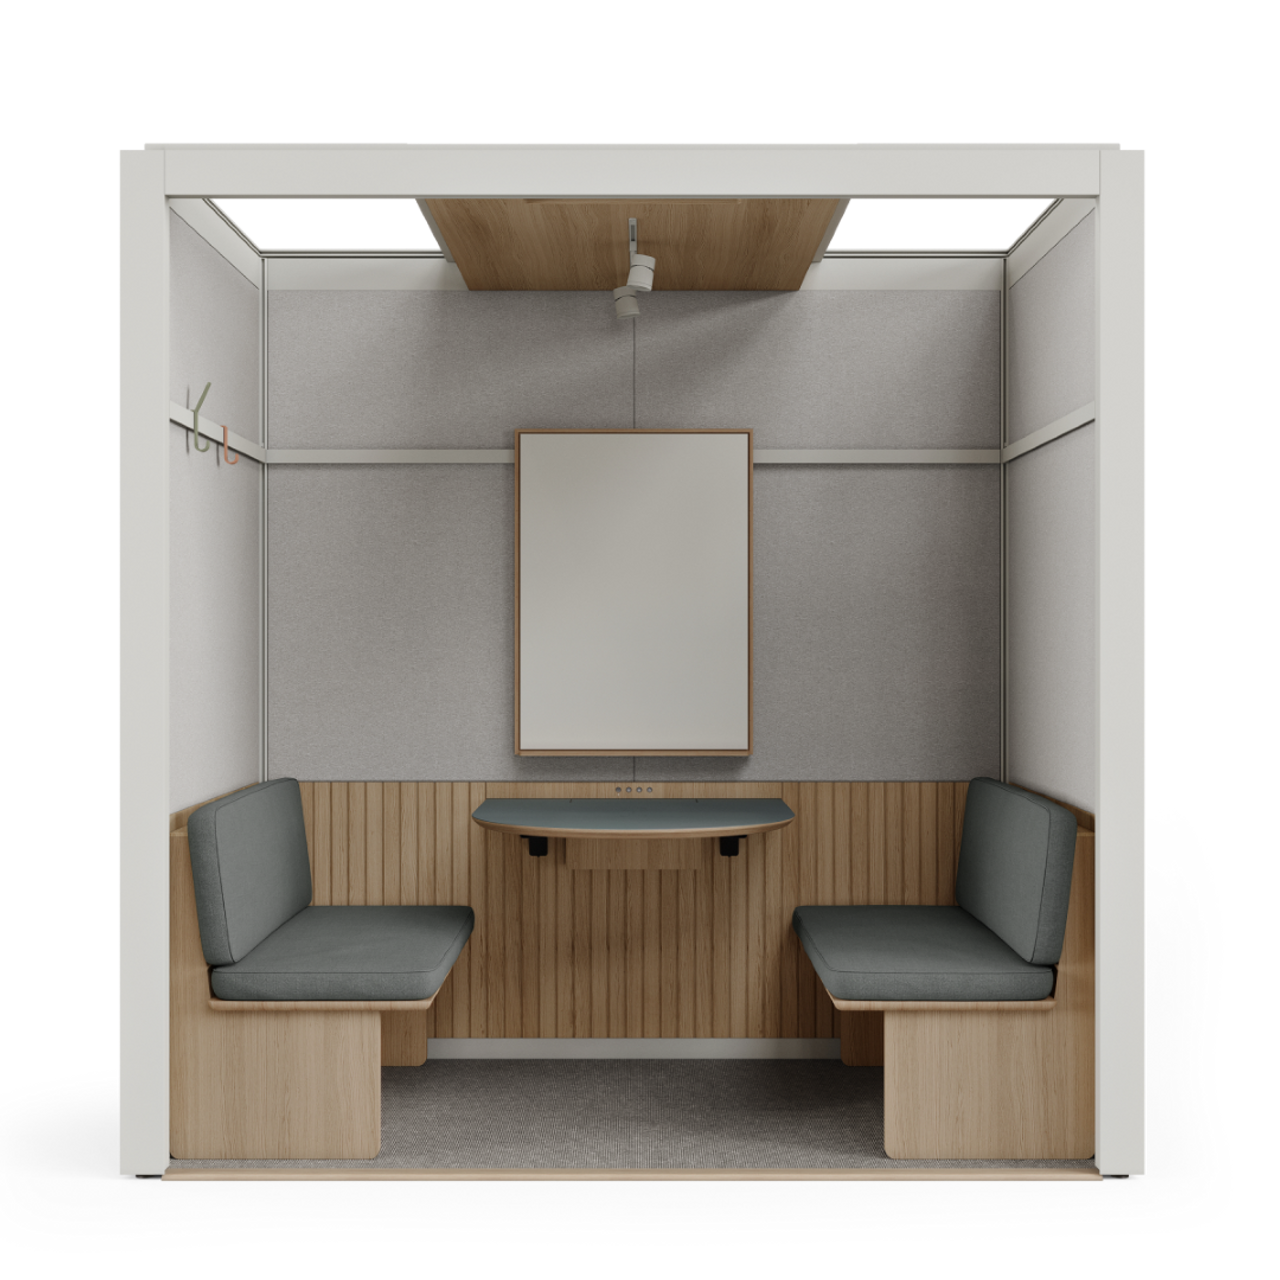 Room Open Acoustic Meeting Pod For Office Spaces | Panelscreens